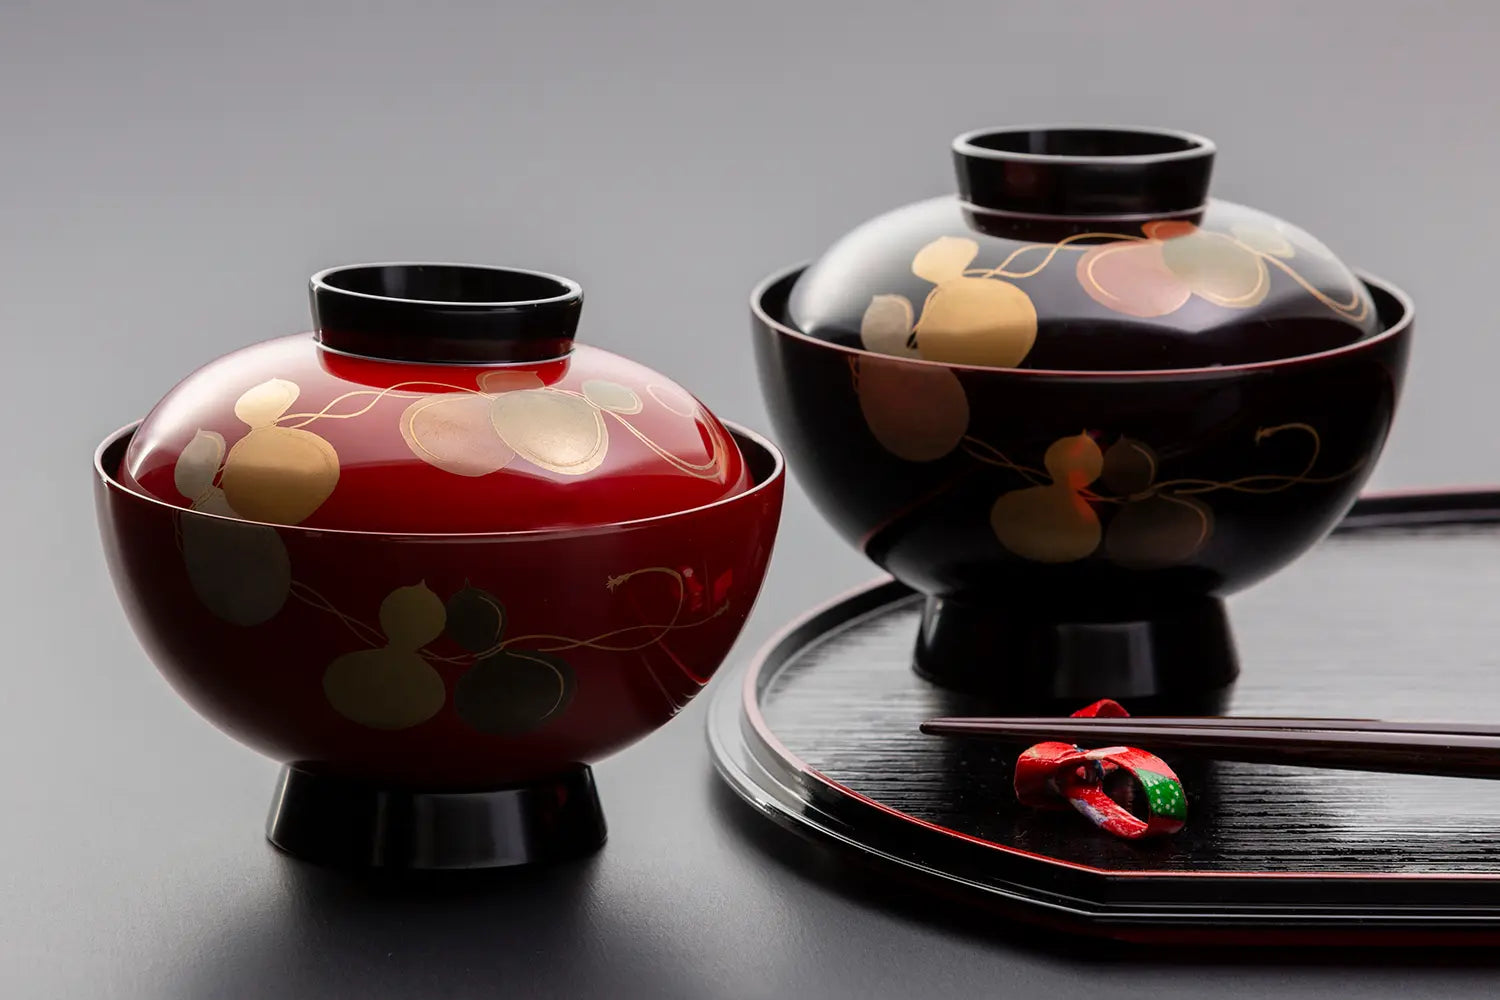 How to take care of Japanese traditional "Shikki Lacquerware"